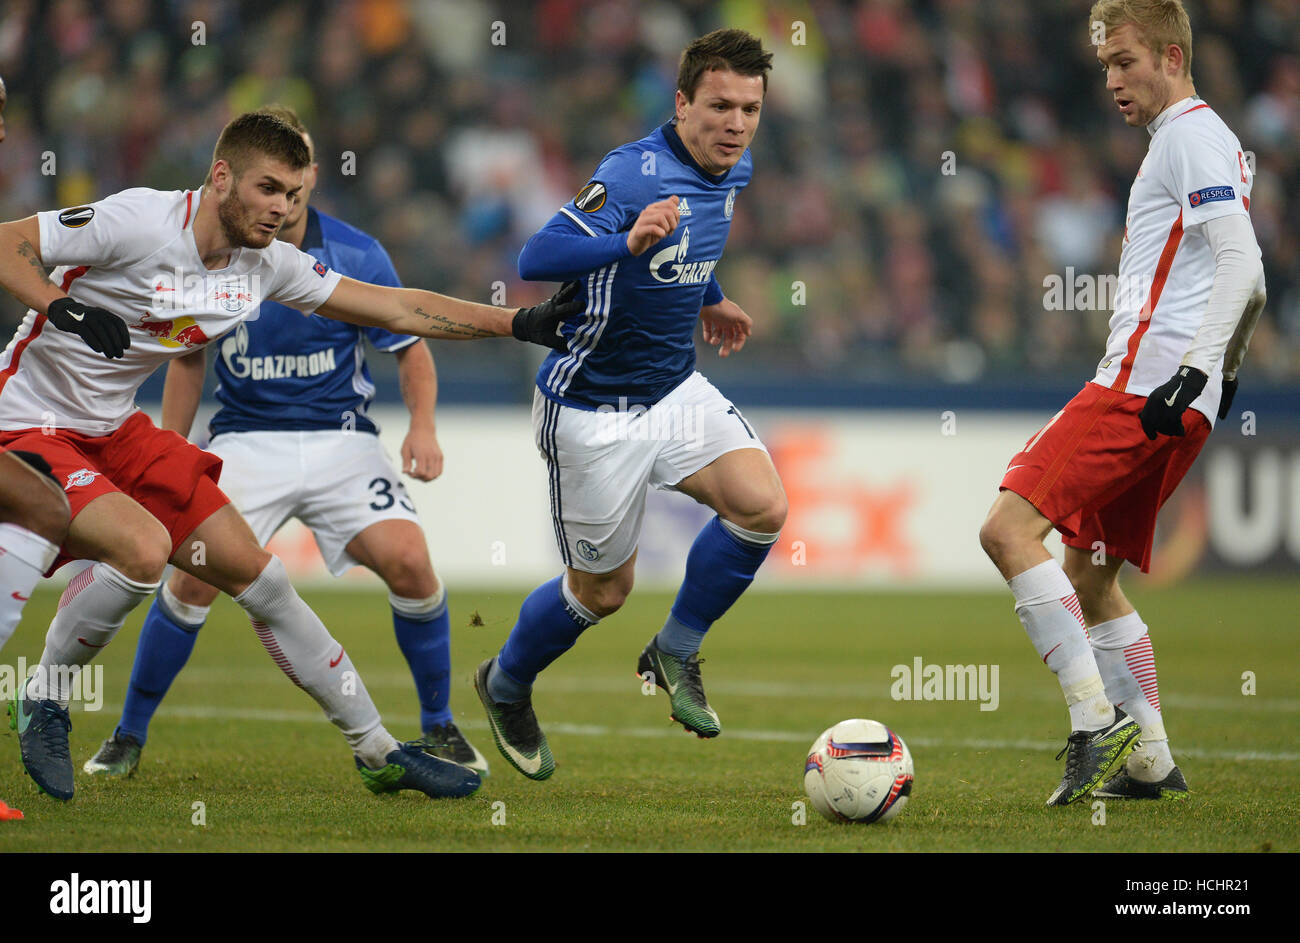 Salzburg, Austria. 8th Dec, 2016. Salzburg's Duje Caleta-Car (l) and Schalke's Yevhen Konoplyanka (c) in action during the Europa League group phase soccer match between RB Salzburg and FC Schalke 04 at the Red Bull Arena in Salzburg, Austria, 8 December 2016. Photo: Andreas Gebert/dpa/Alamy Live News Stock Photo